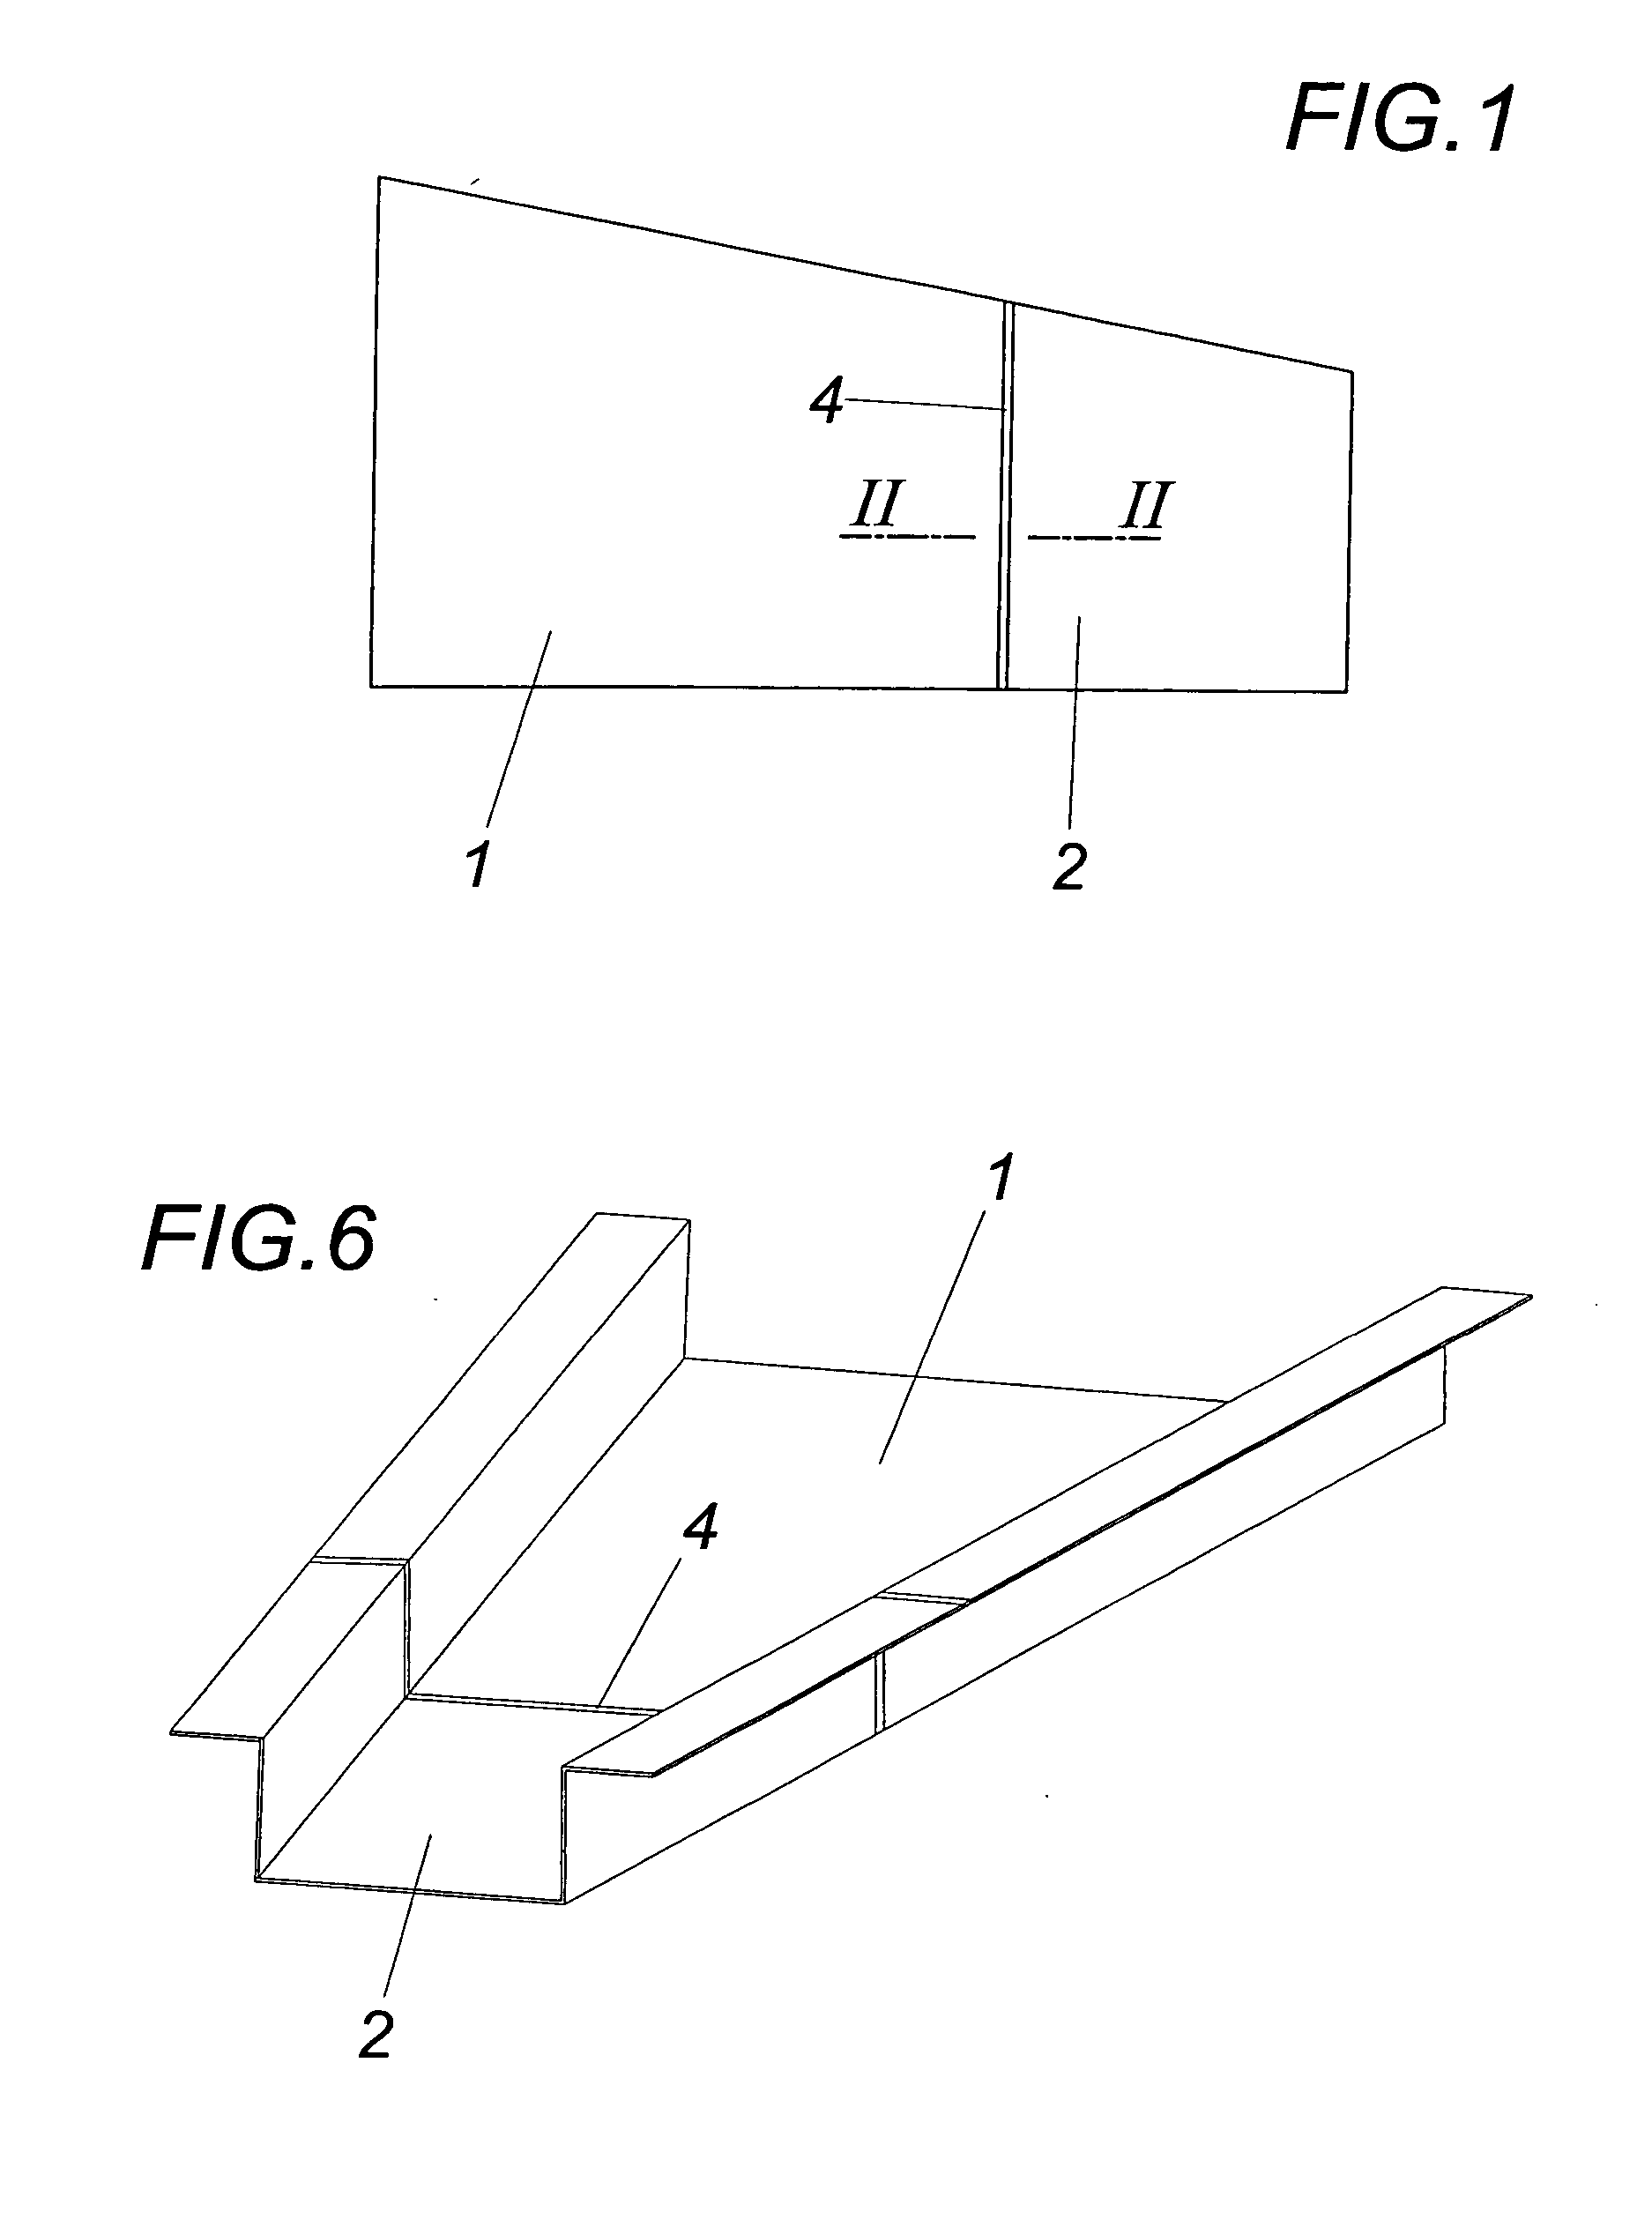 Method for joining two metal sheets respectively consisting of an aluminum material and an iron or titanium materials by means of a braze welding joint